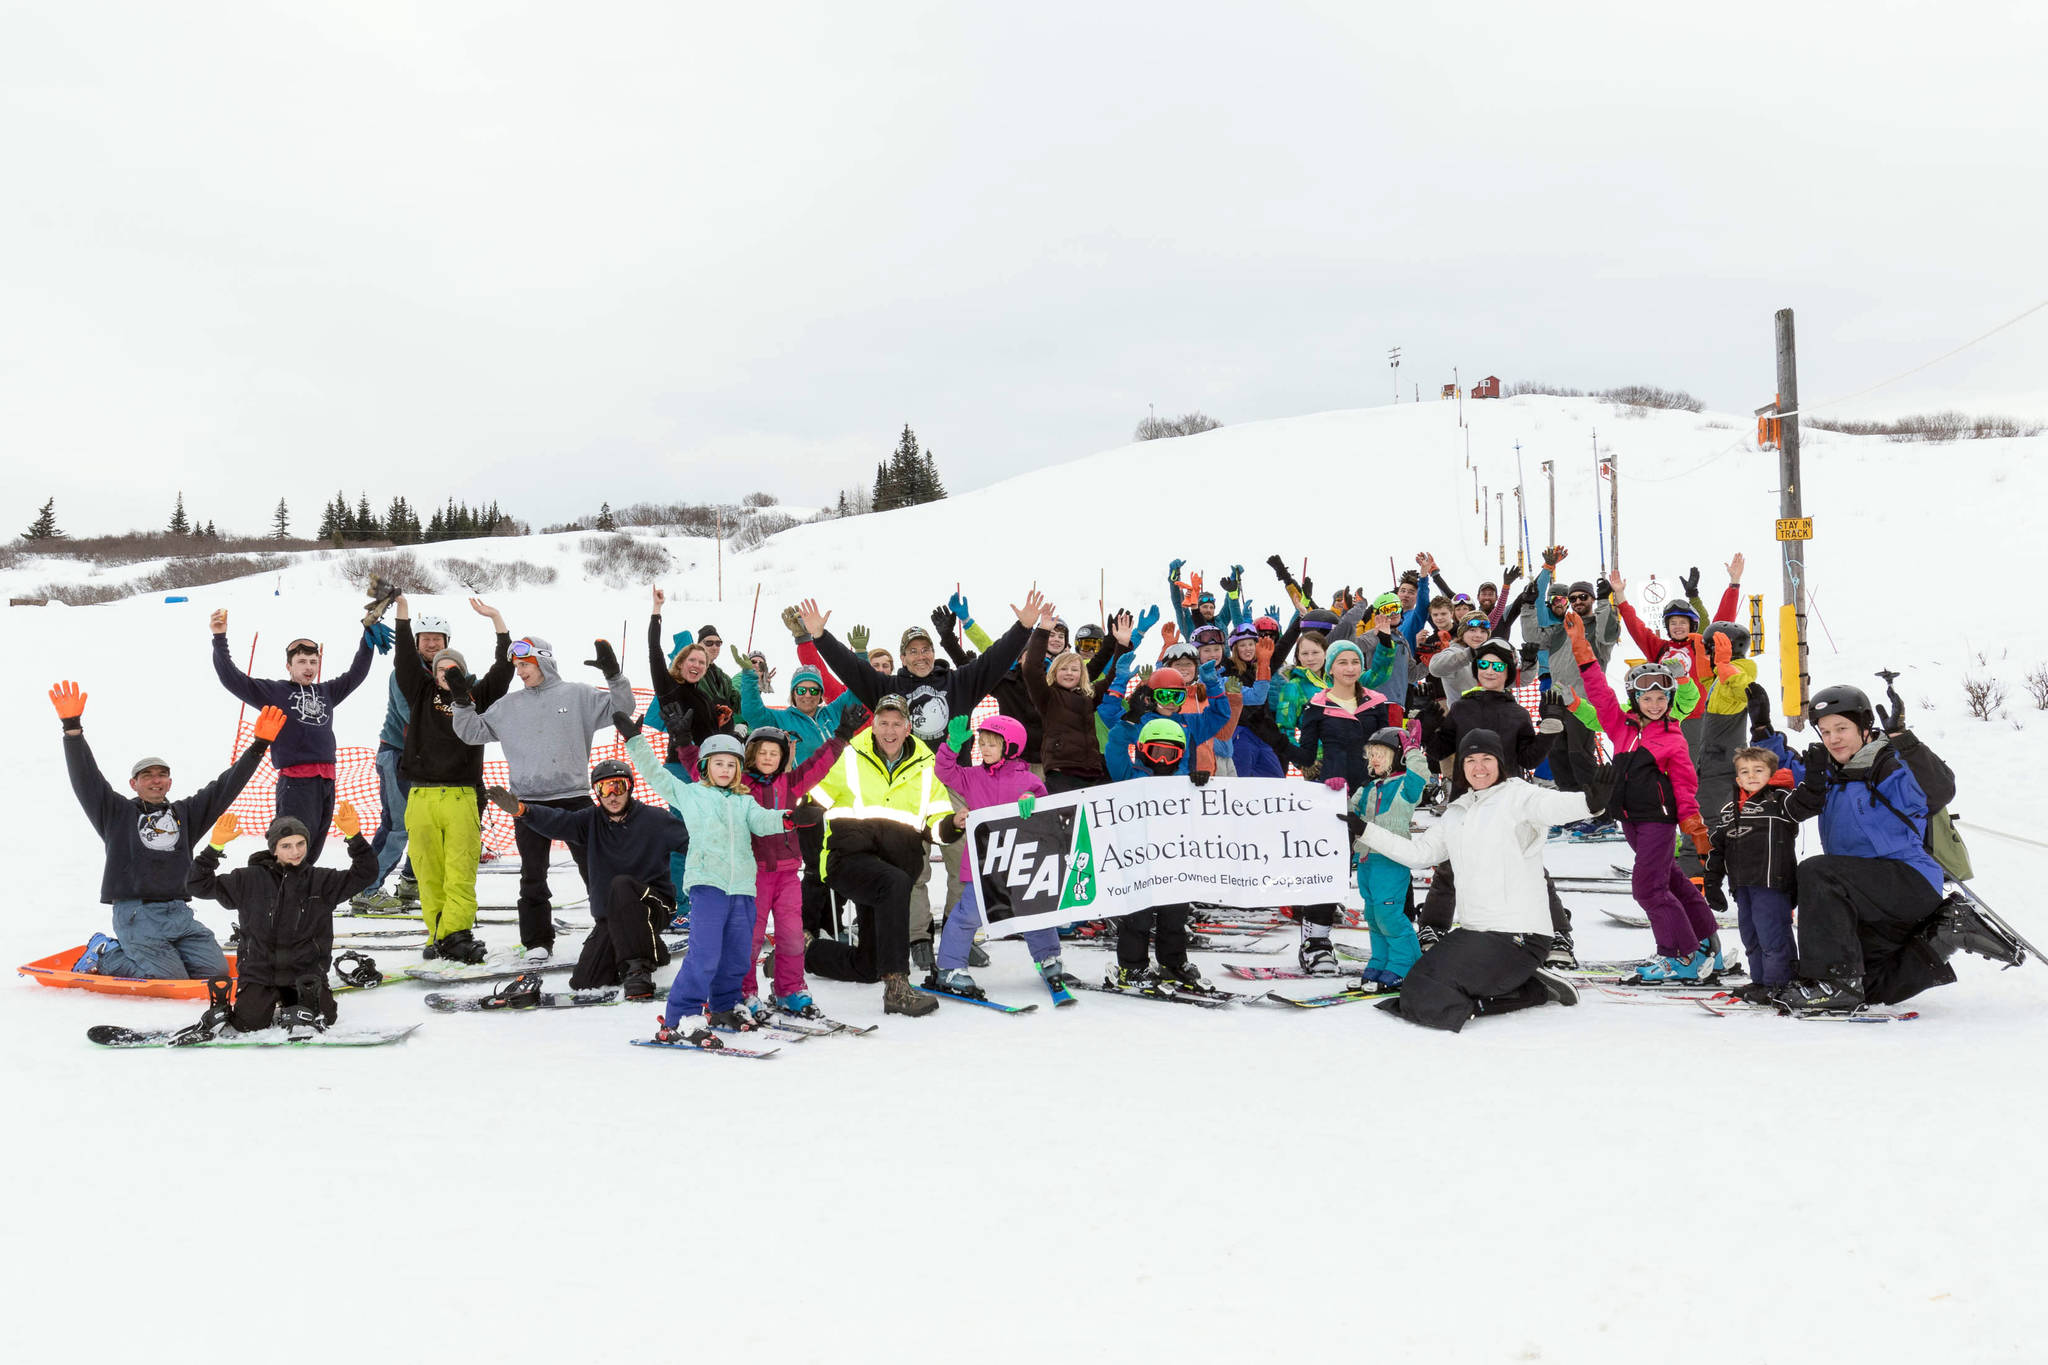 Skiers and snowboarders pose for a photo at the Ohlson Mountain Rope Tow on Sunday, March 18, 2018 for Homer Electric Association Day just outside of Homer, Alaska. HEA Day recognizes the partnership and support of HEA with the Kachemak Nordic Ski Club. (Photo by Don Pitcher)